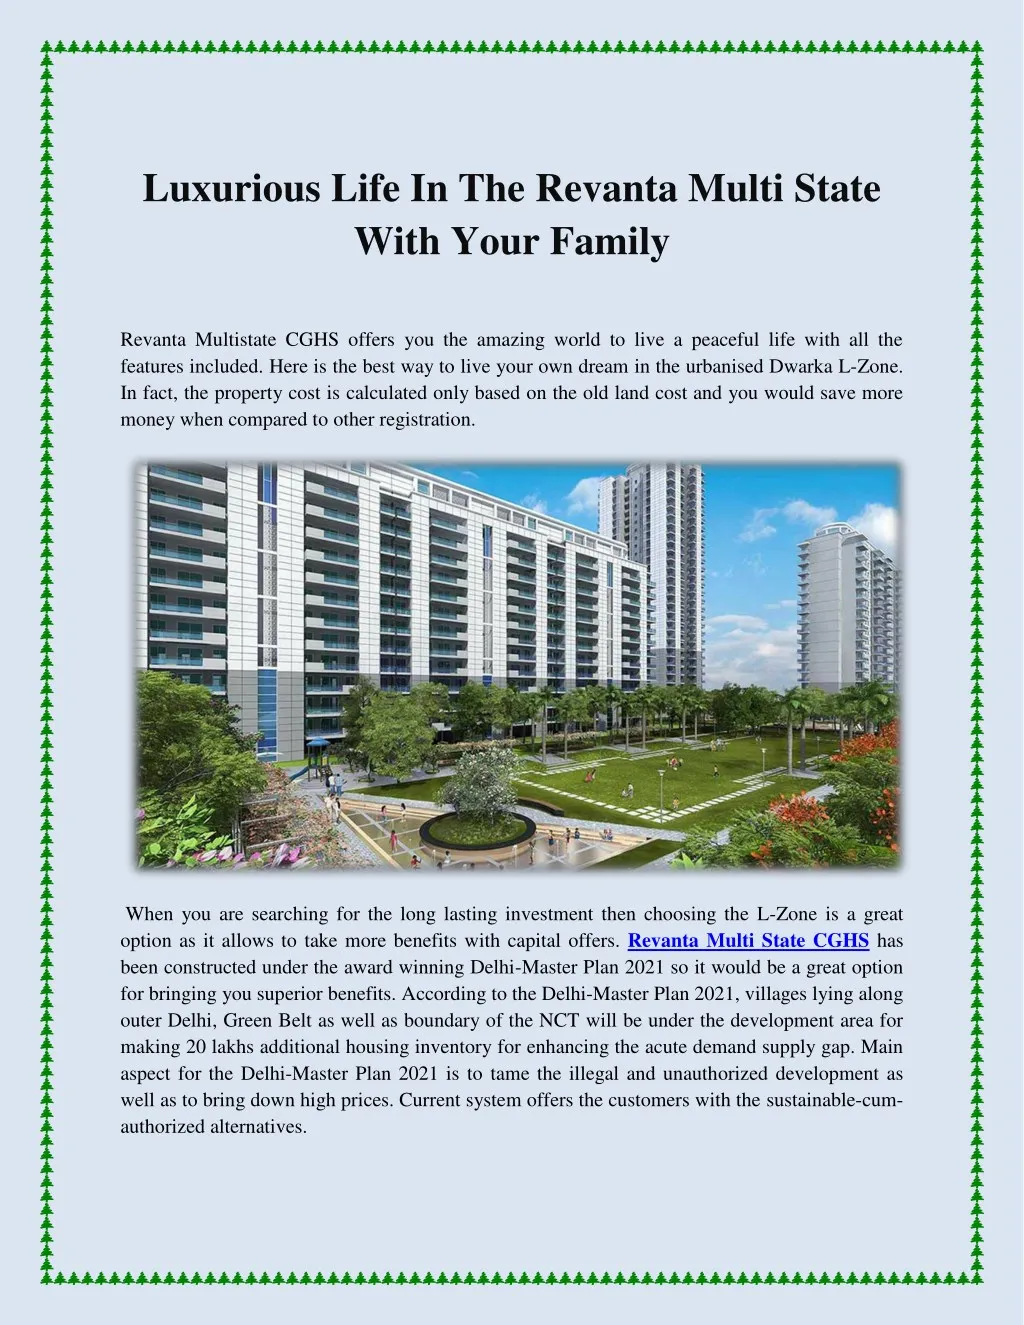 luxurious life in the revanta multi state with